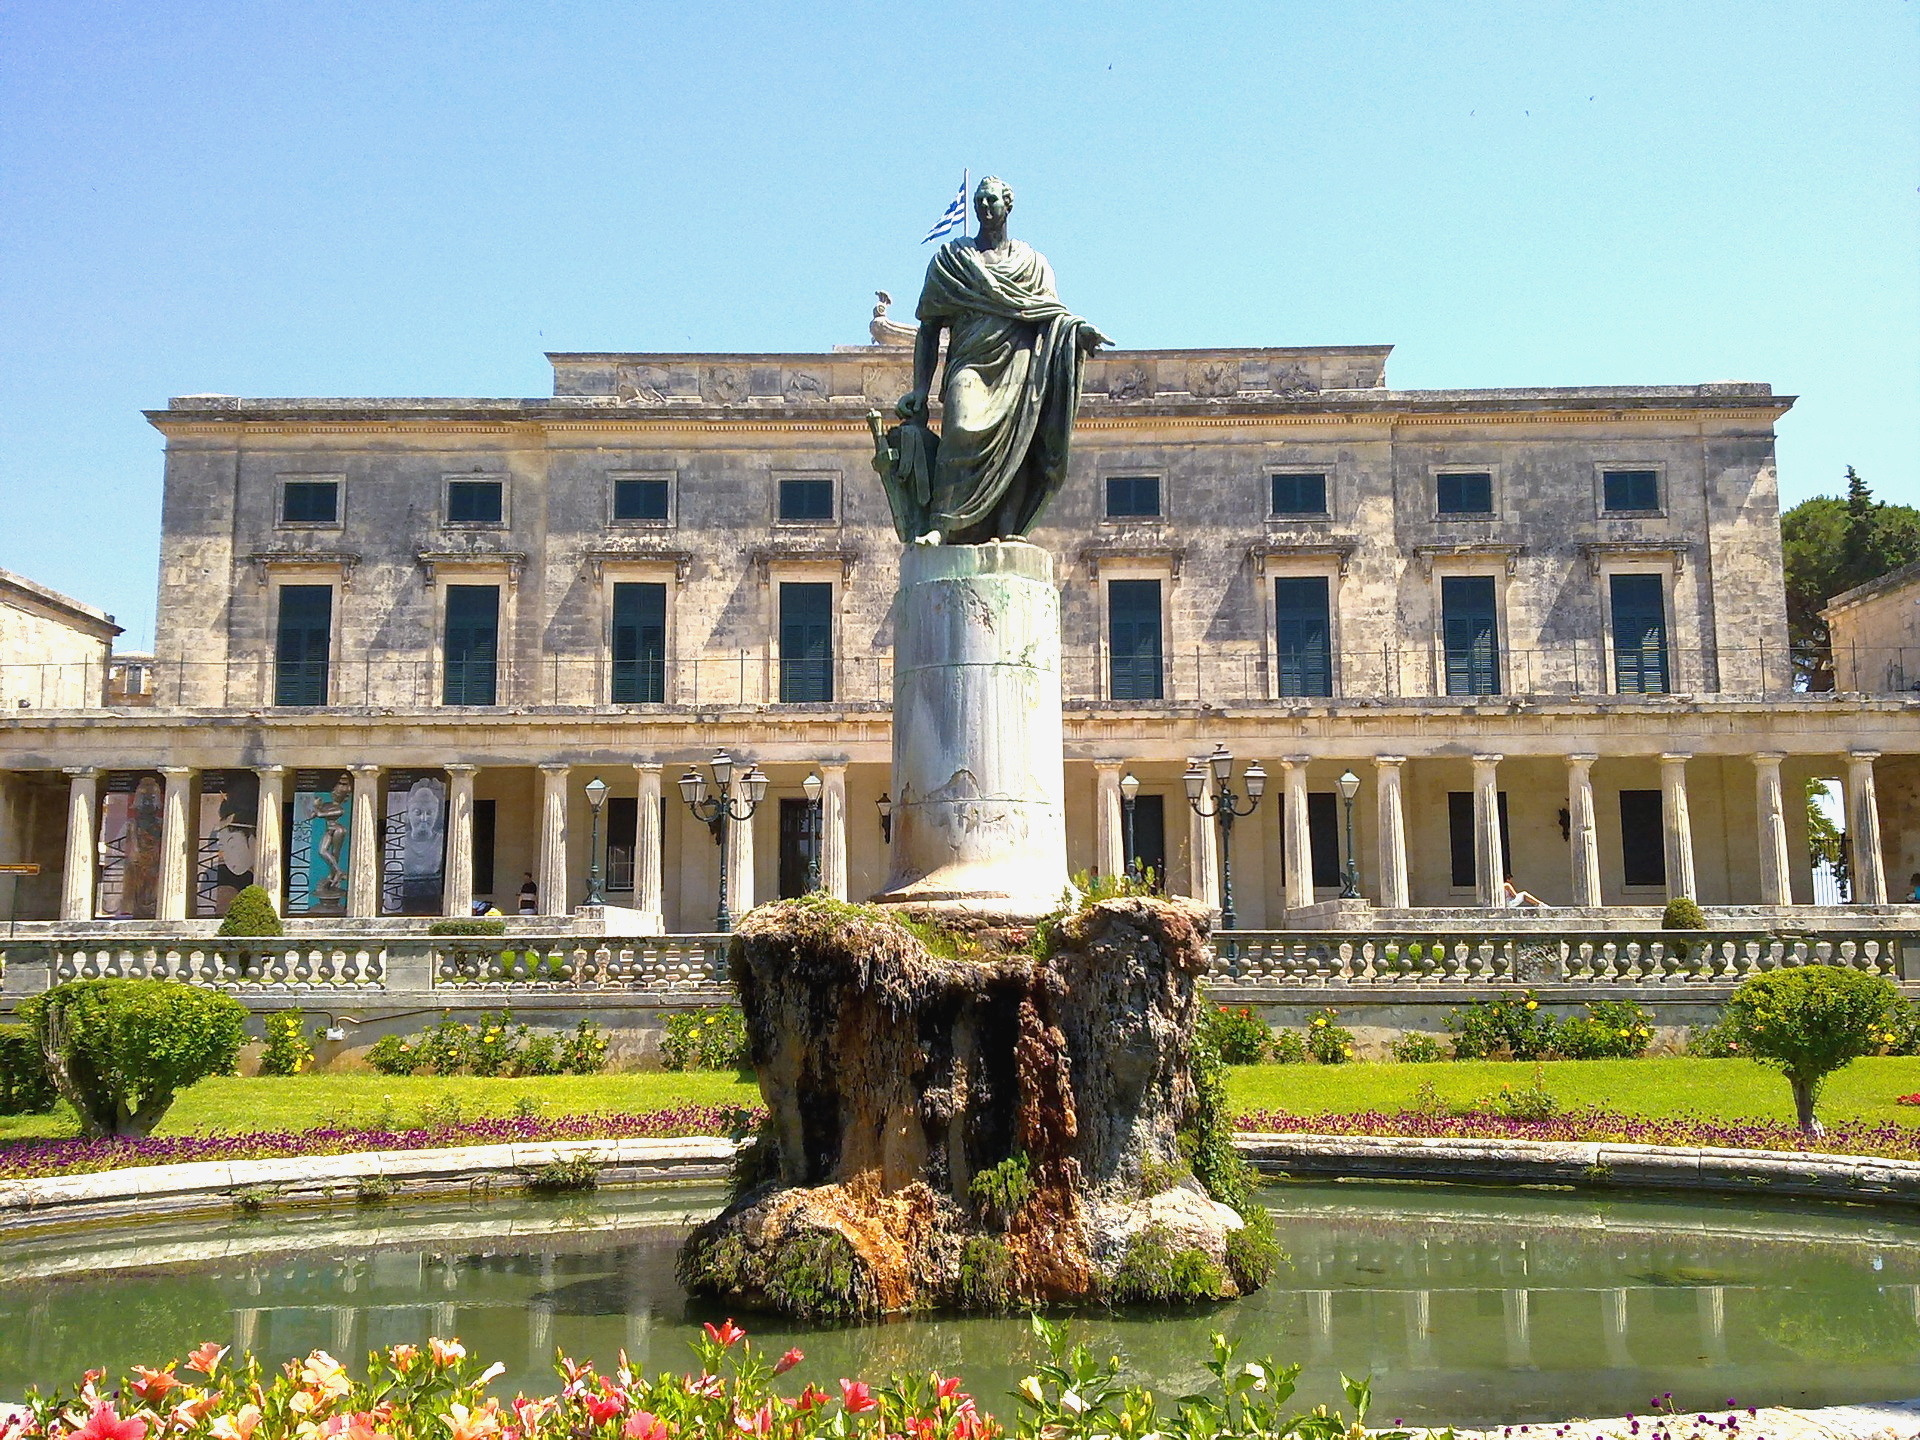 Fountain with statue of a man in a robe in the middle. Behind is a large building showing 18 columns in a row in the front of the building